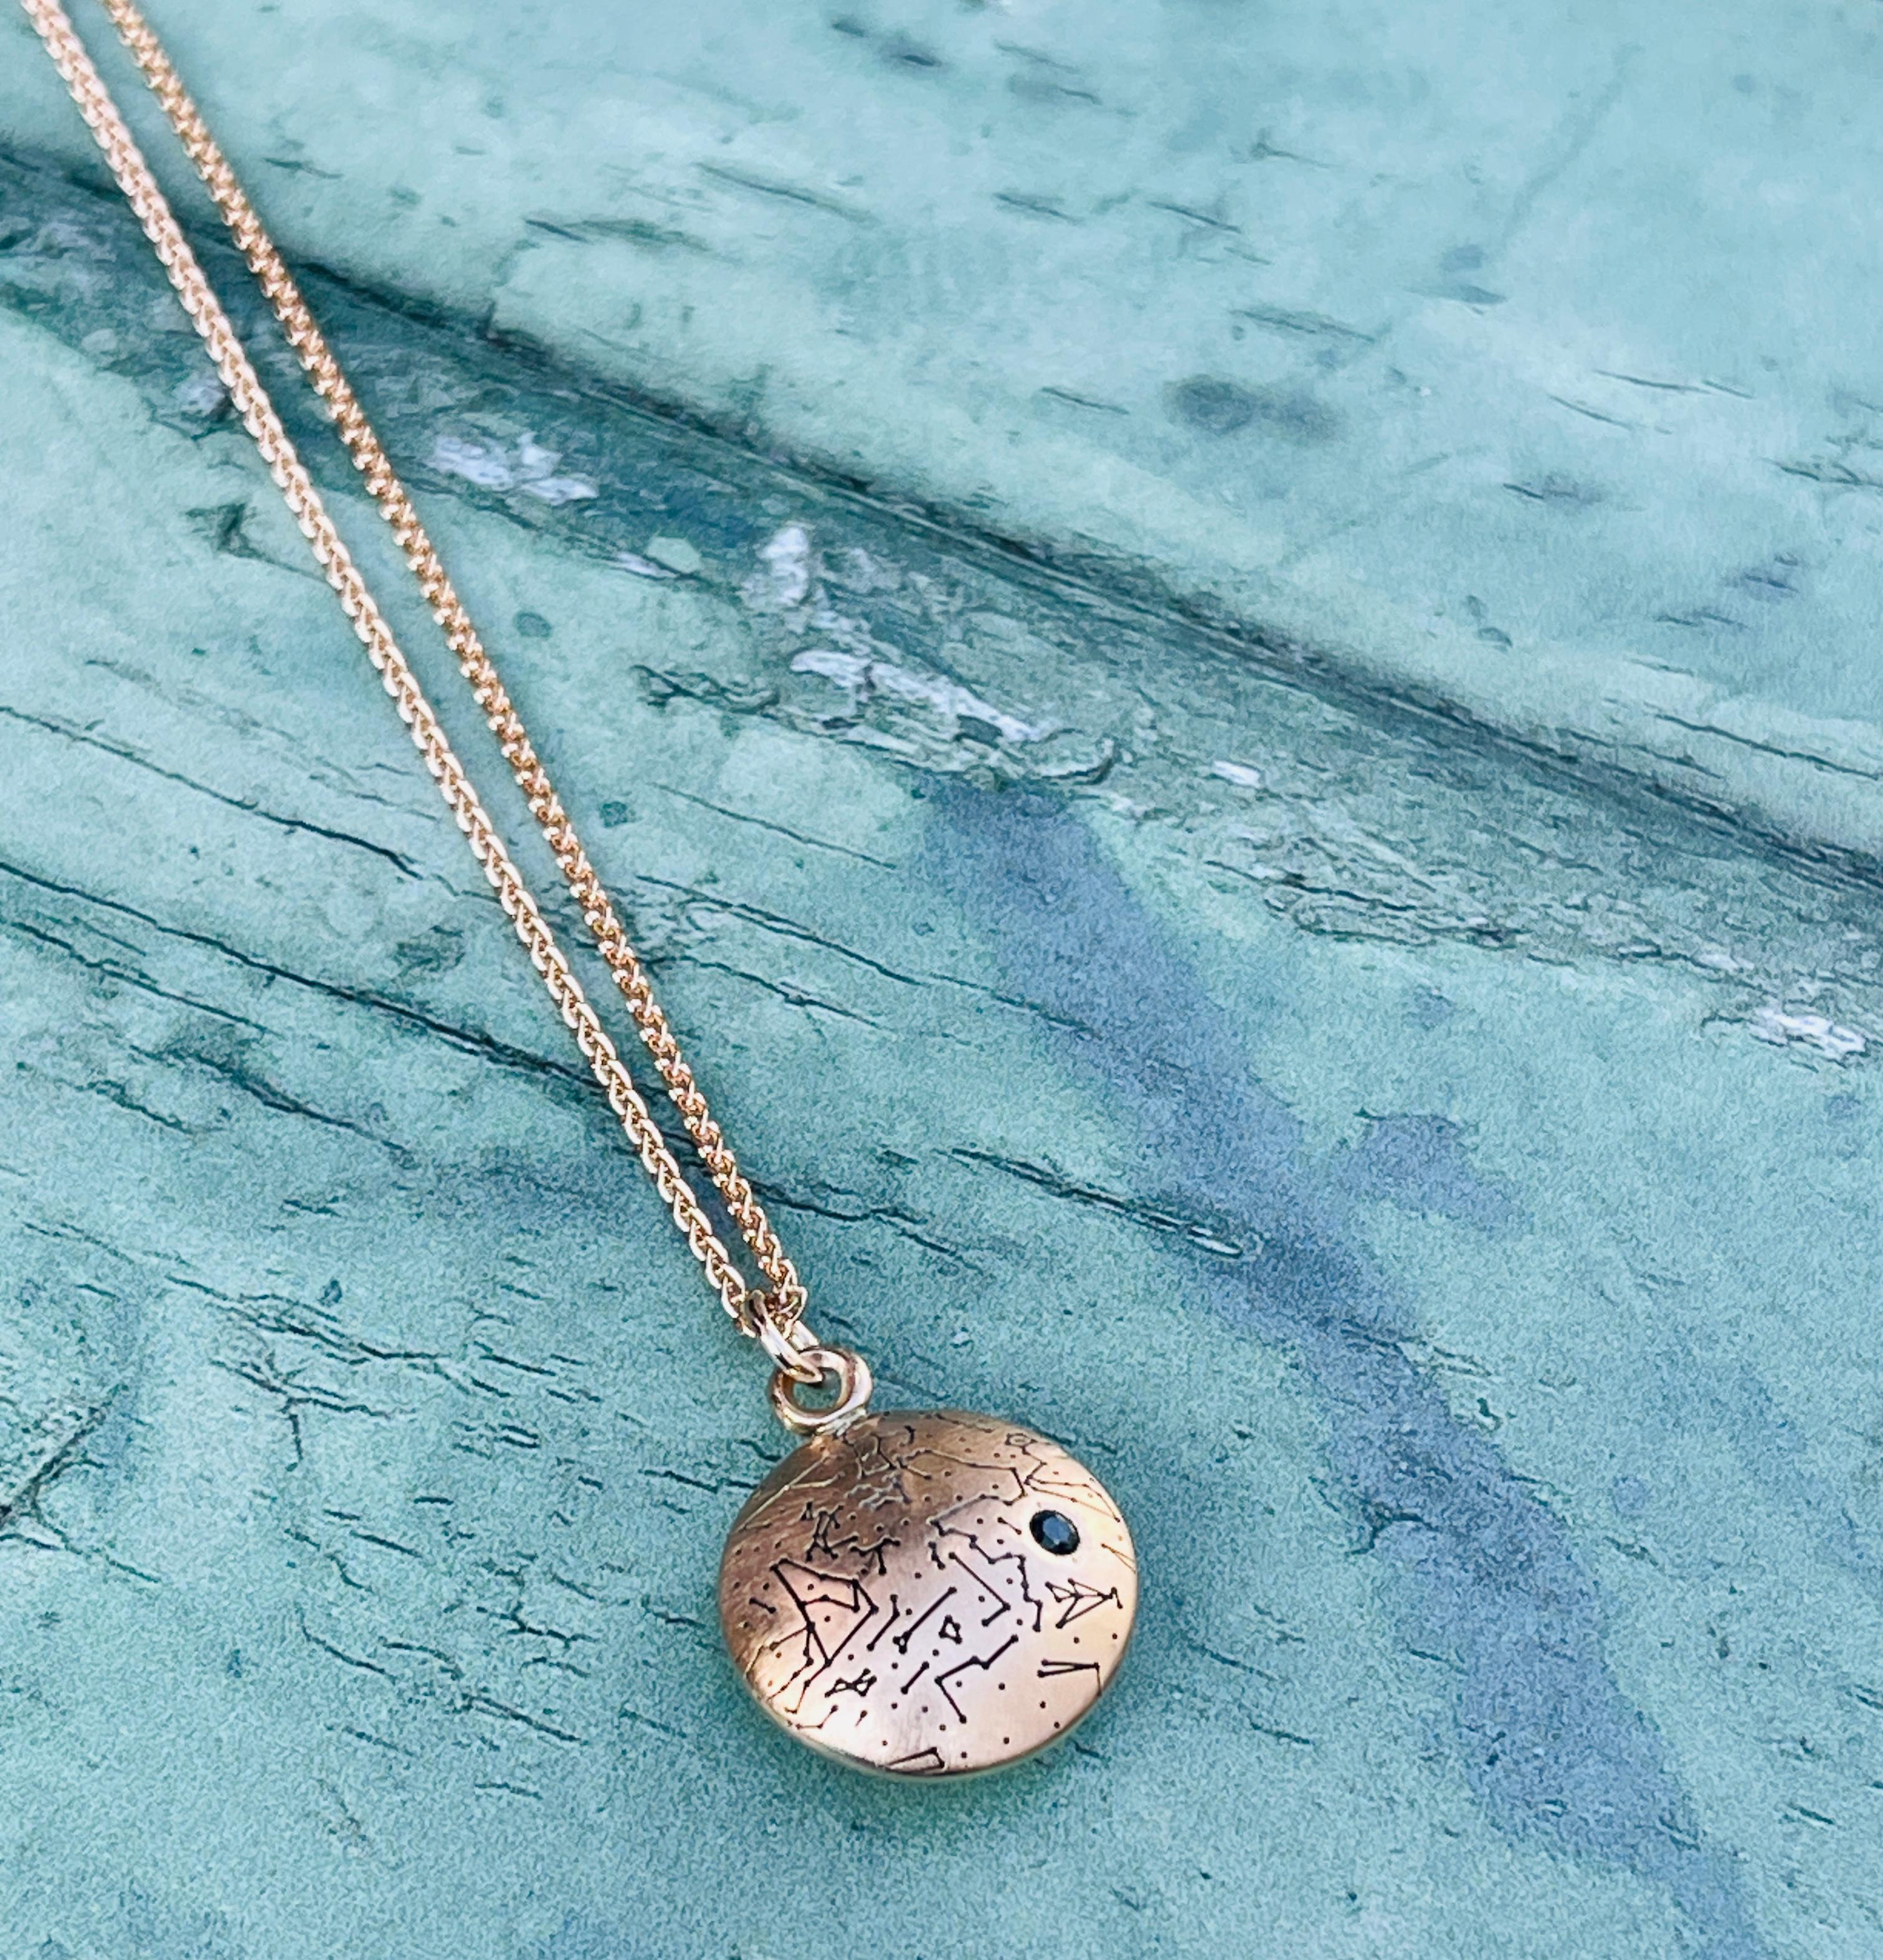 The original and by far the best Starmap pendant featuring the stars in the Eastern sky seen from the exact time and place of your recipients birth.

This beautiful pendant shows the stars in the sky at your exact moment in time - any special moment